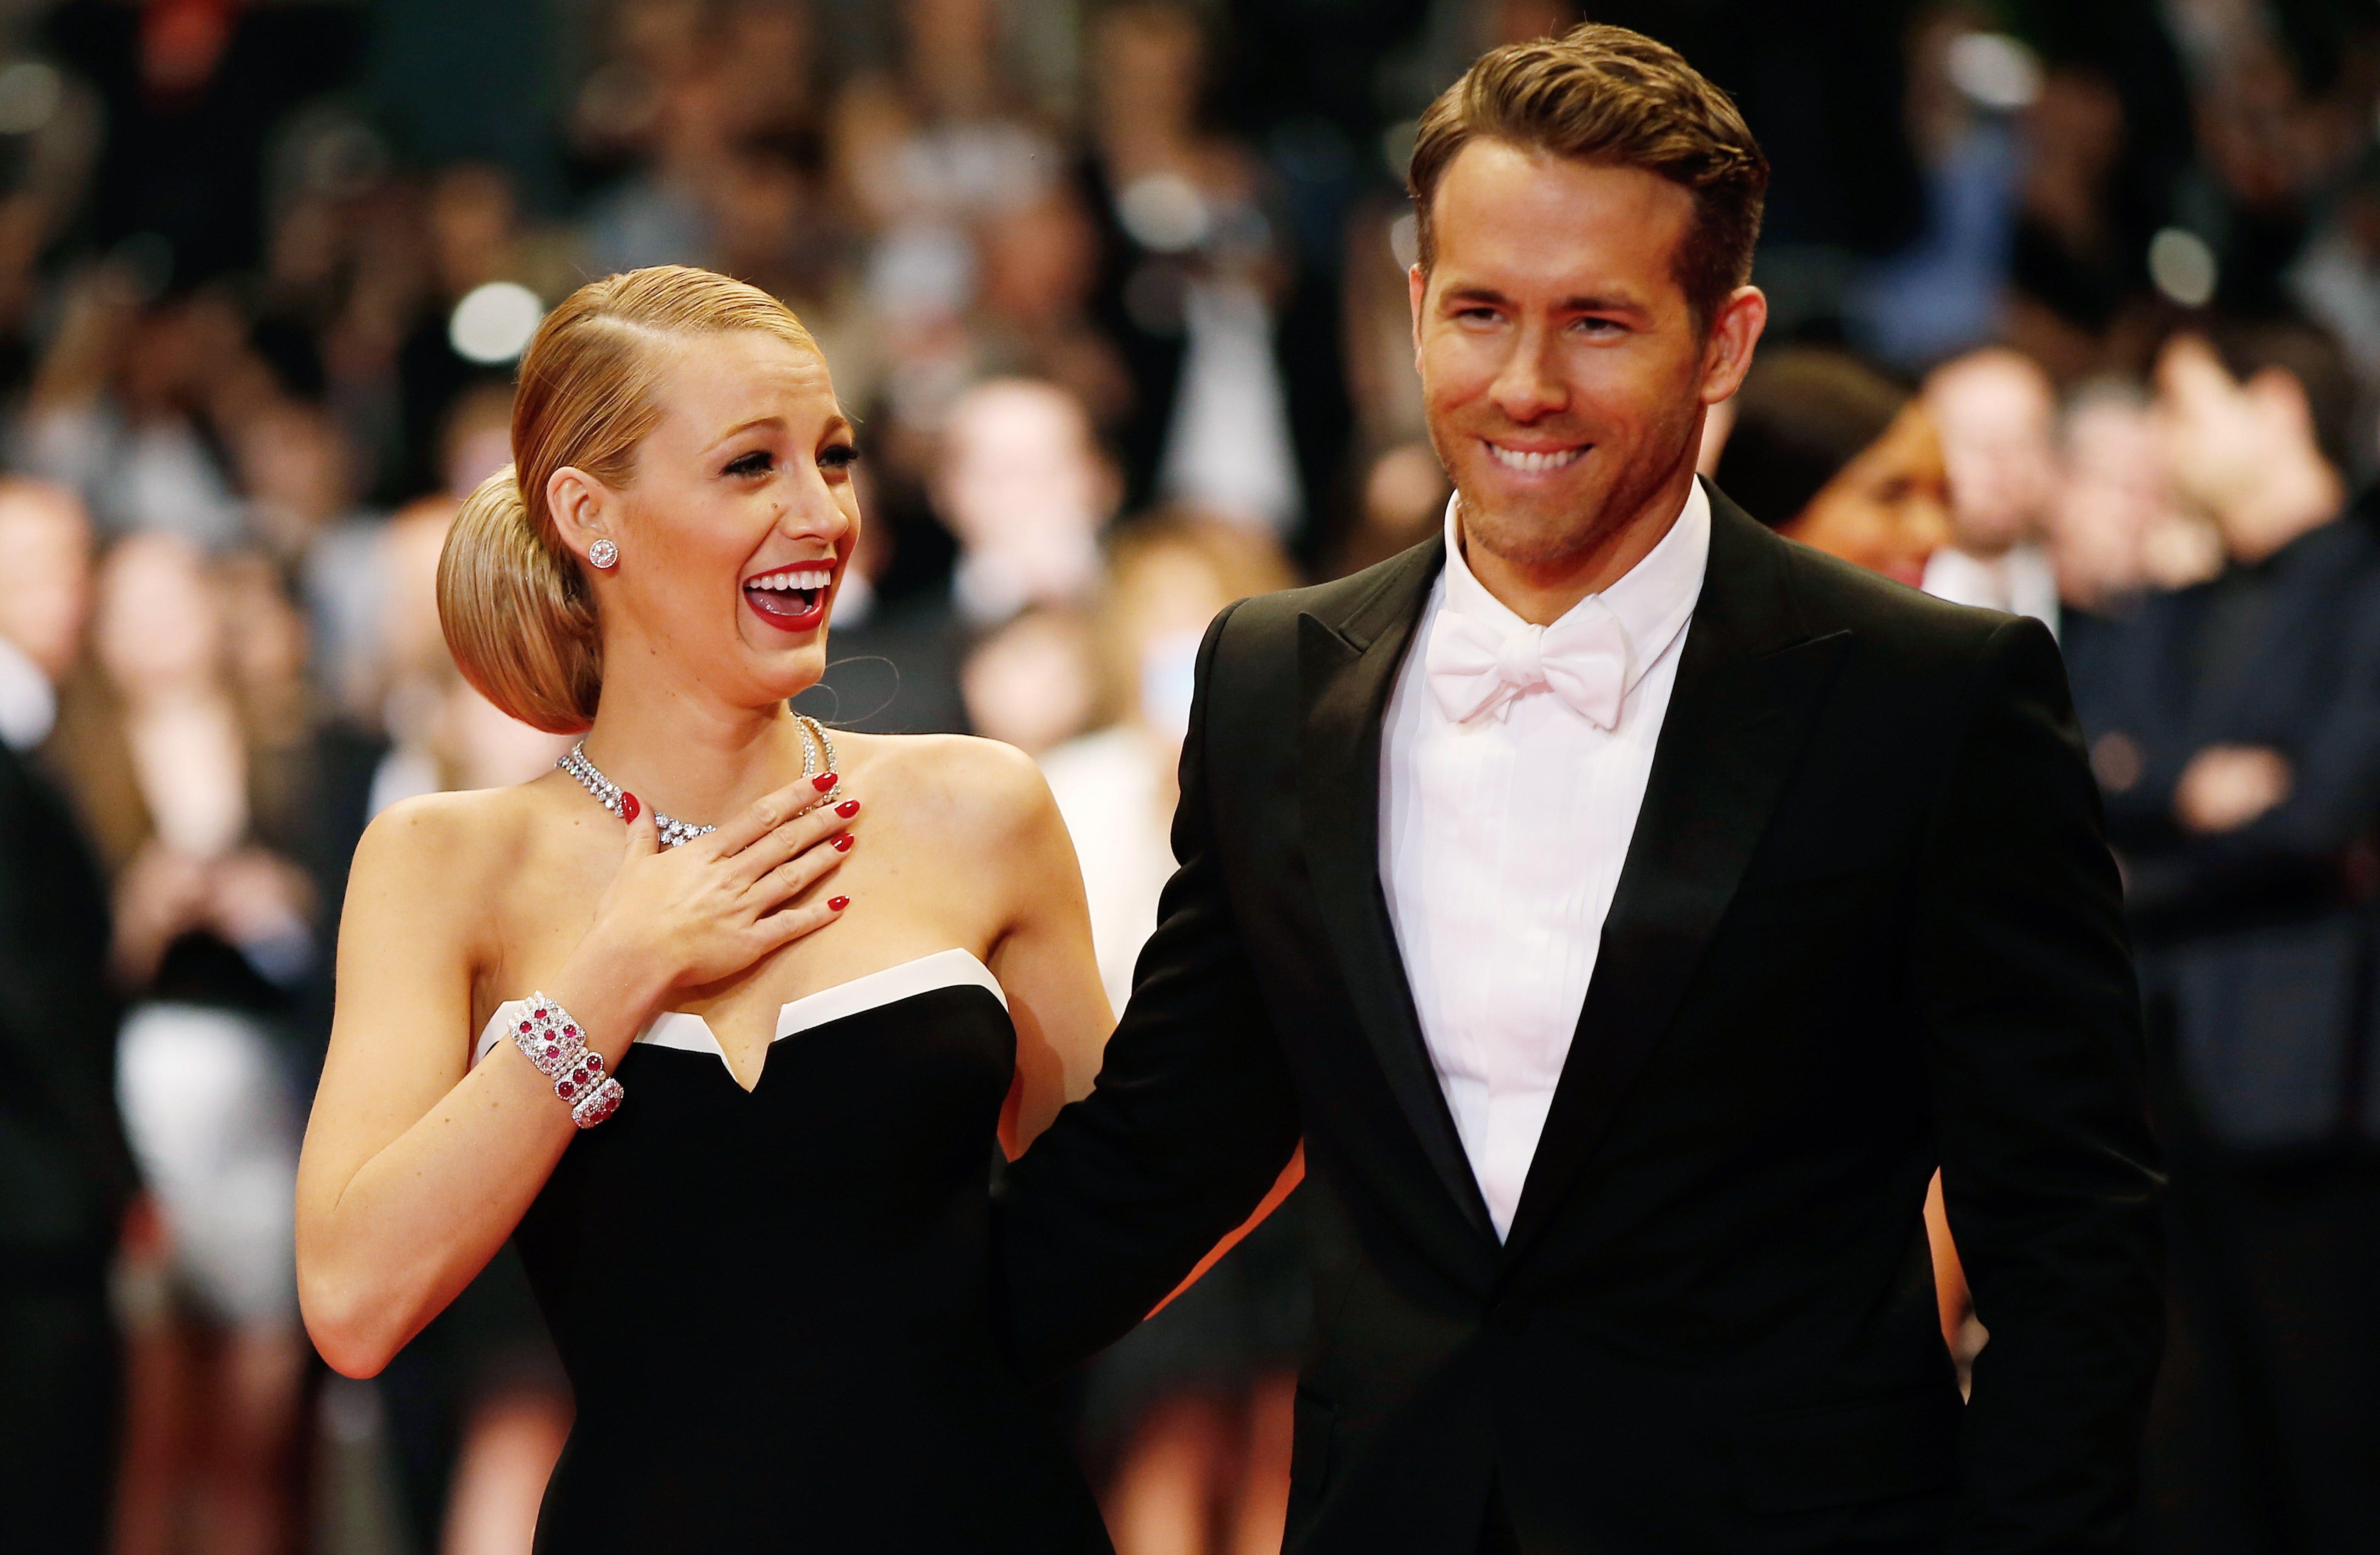 This Is The Important 'Rule' Blake Lively And Ryan Reynolds